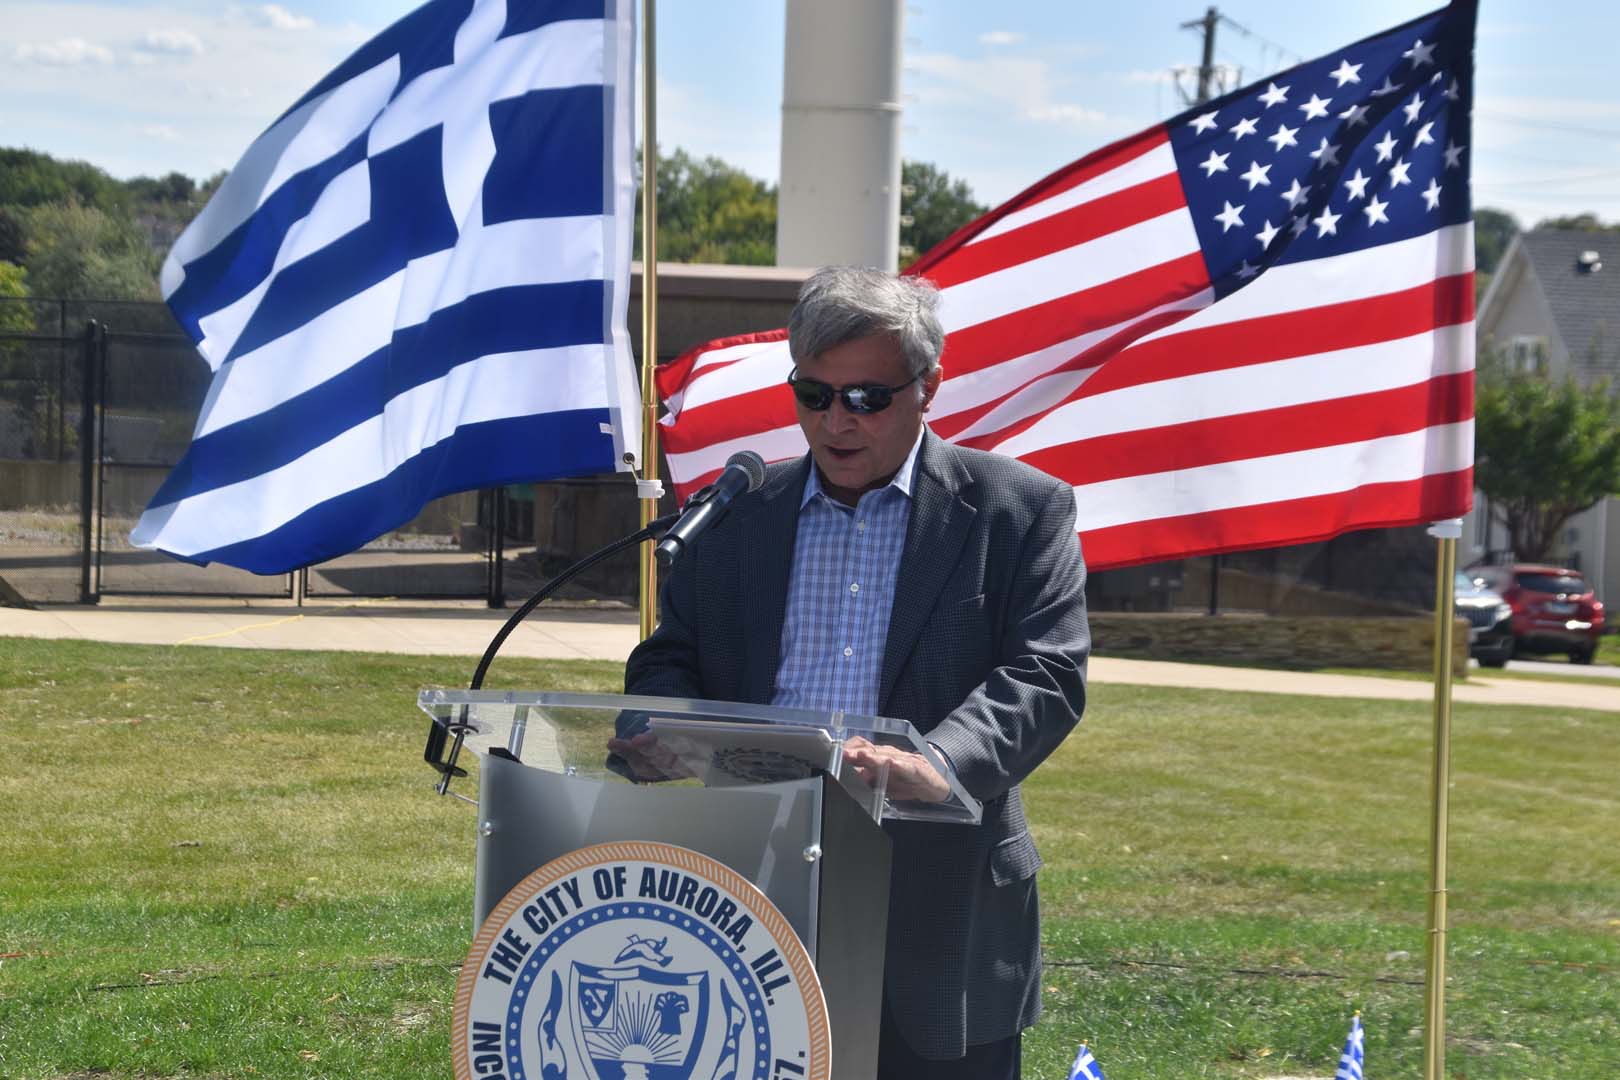 September 25th 2021 monument unveiled in Aurora Illinois - Peter Zouras